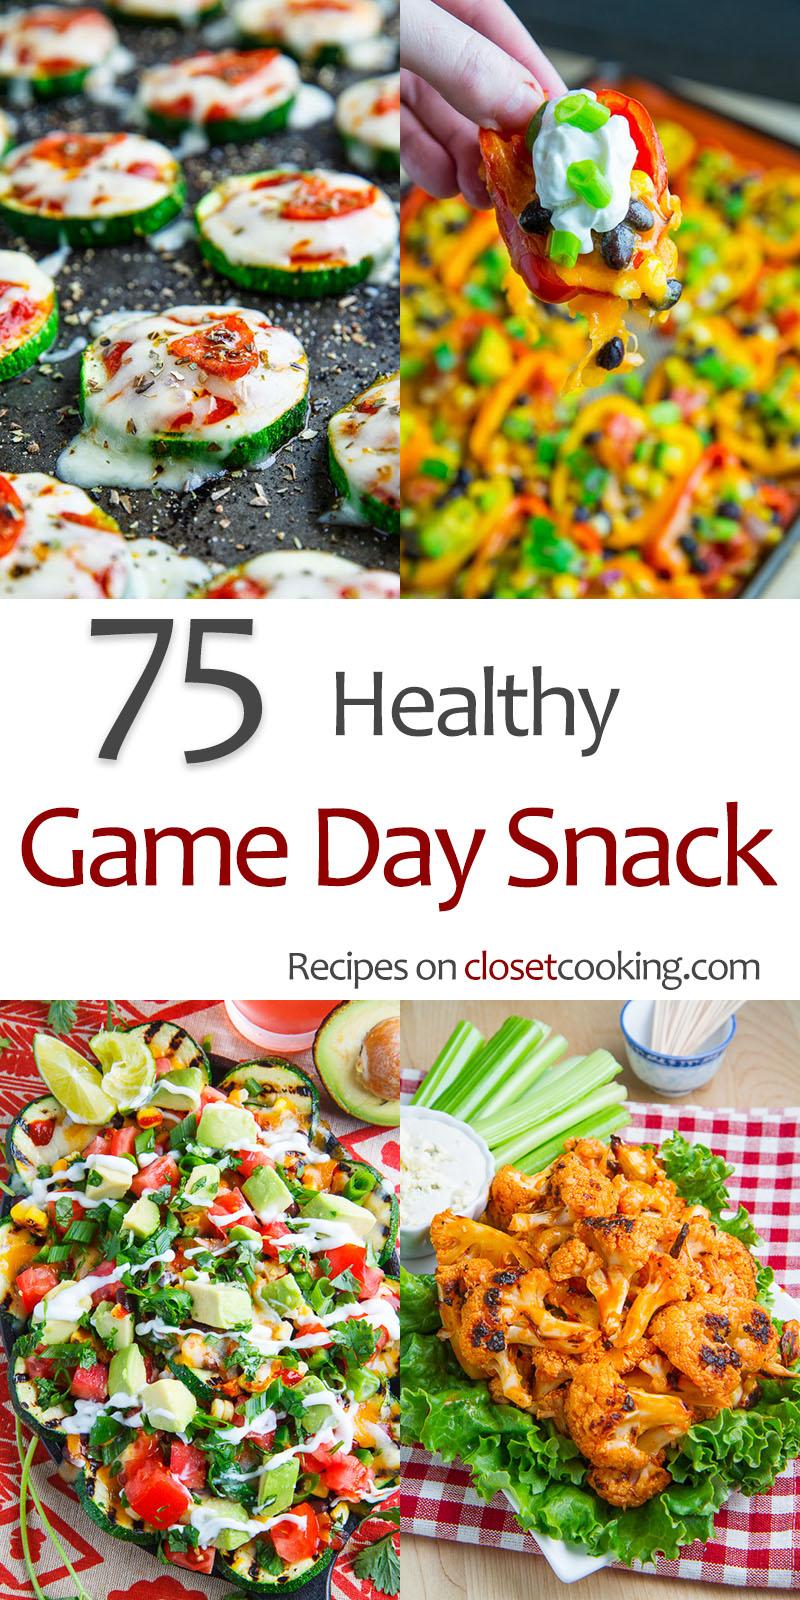 75 Healthy Game Day Snacks